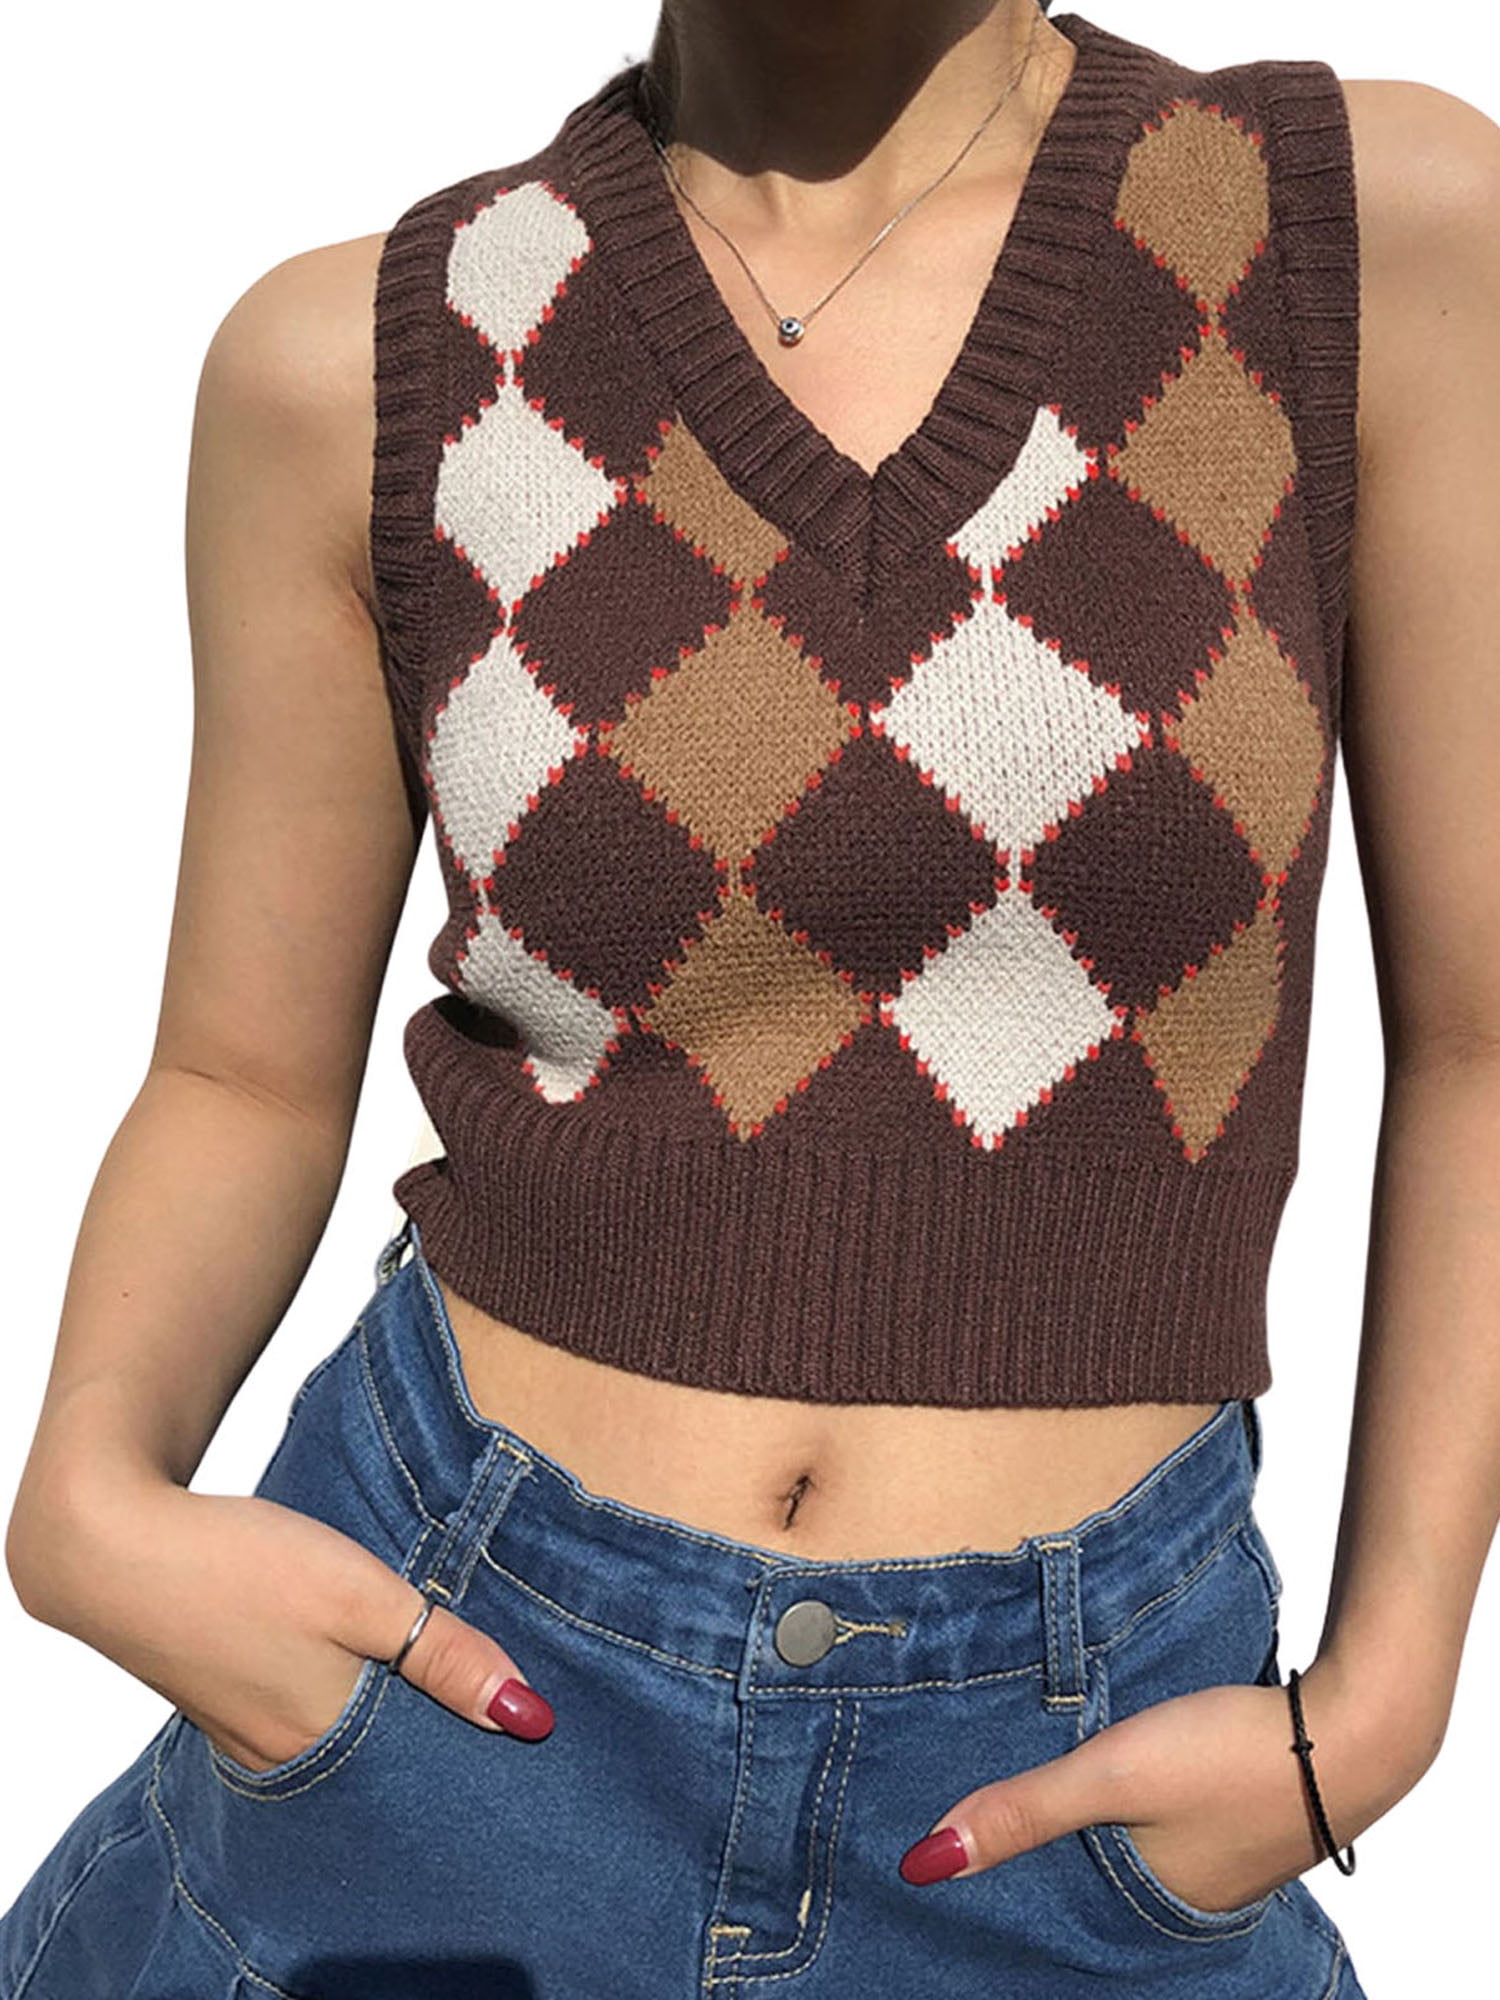 Women Sleeveless Plaid Knitted Crop Top Knitwear Backless Camisole Sweater Vest